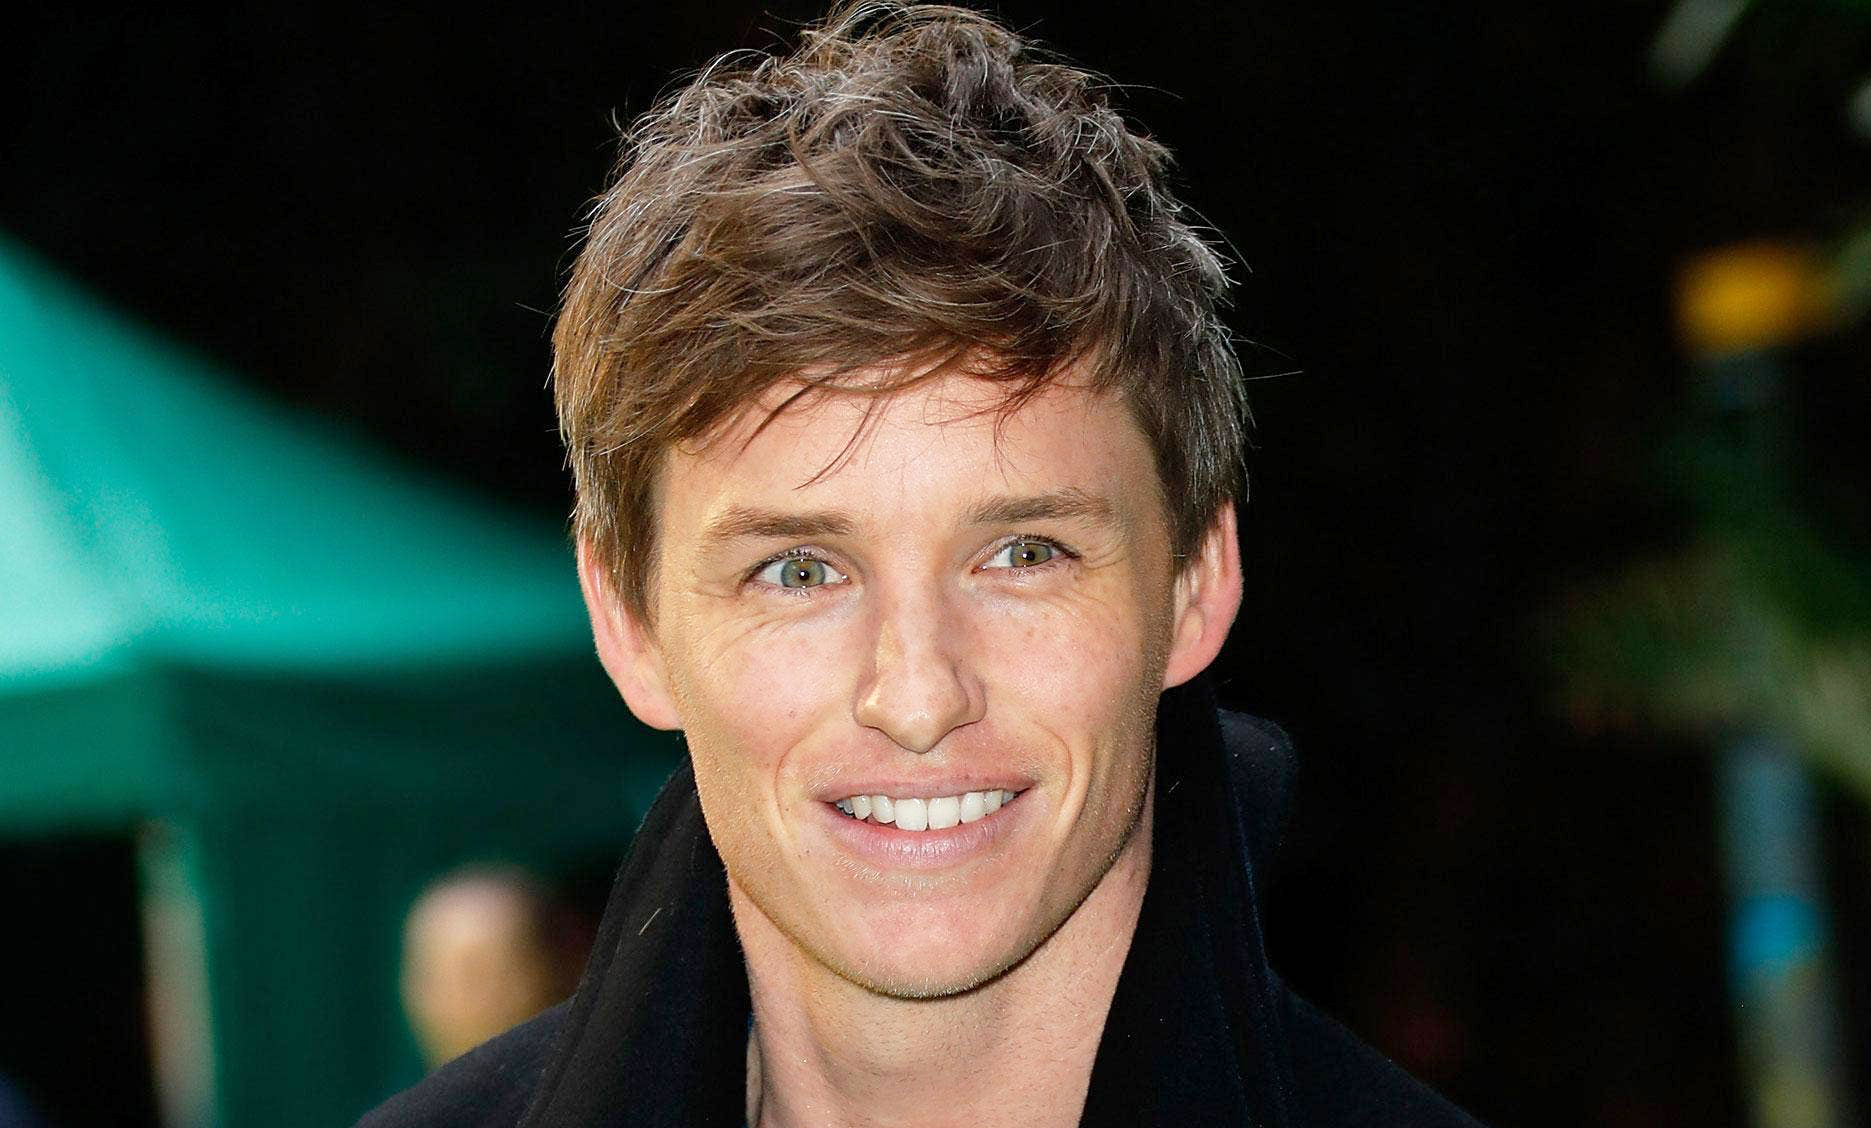 Eddie Redmayne Frontal Nude Uncensored Pics & Vids Collection